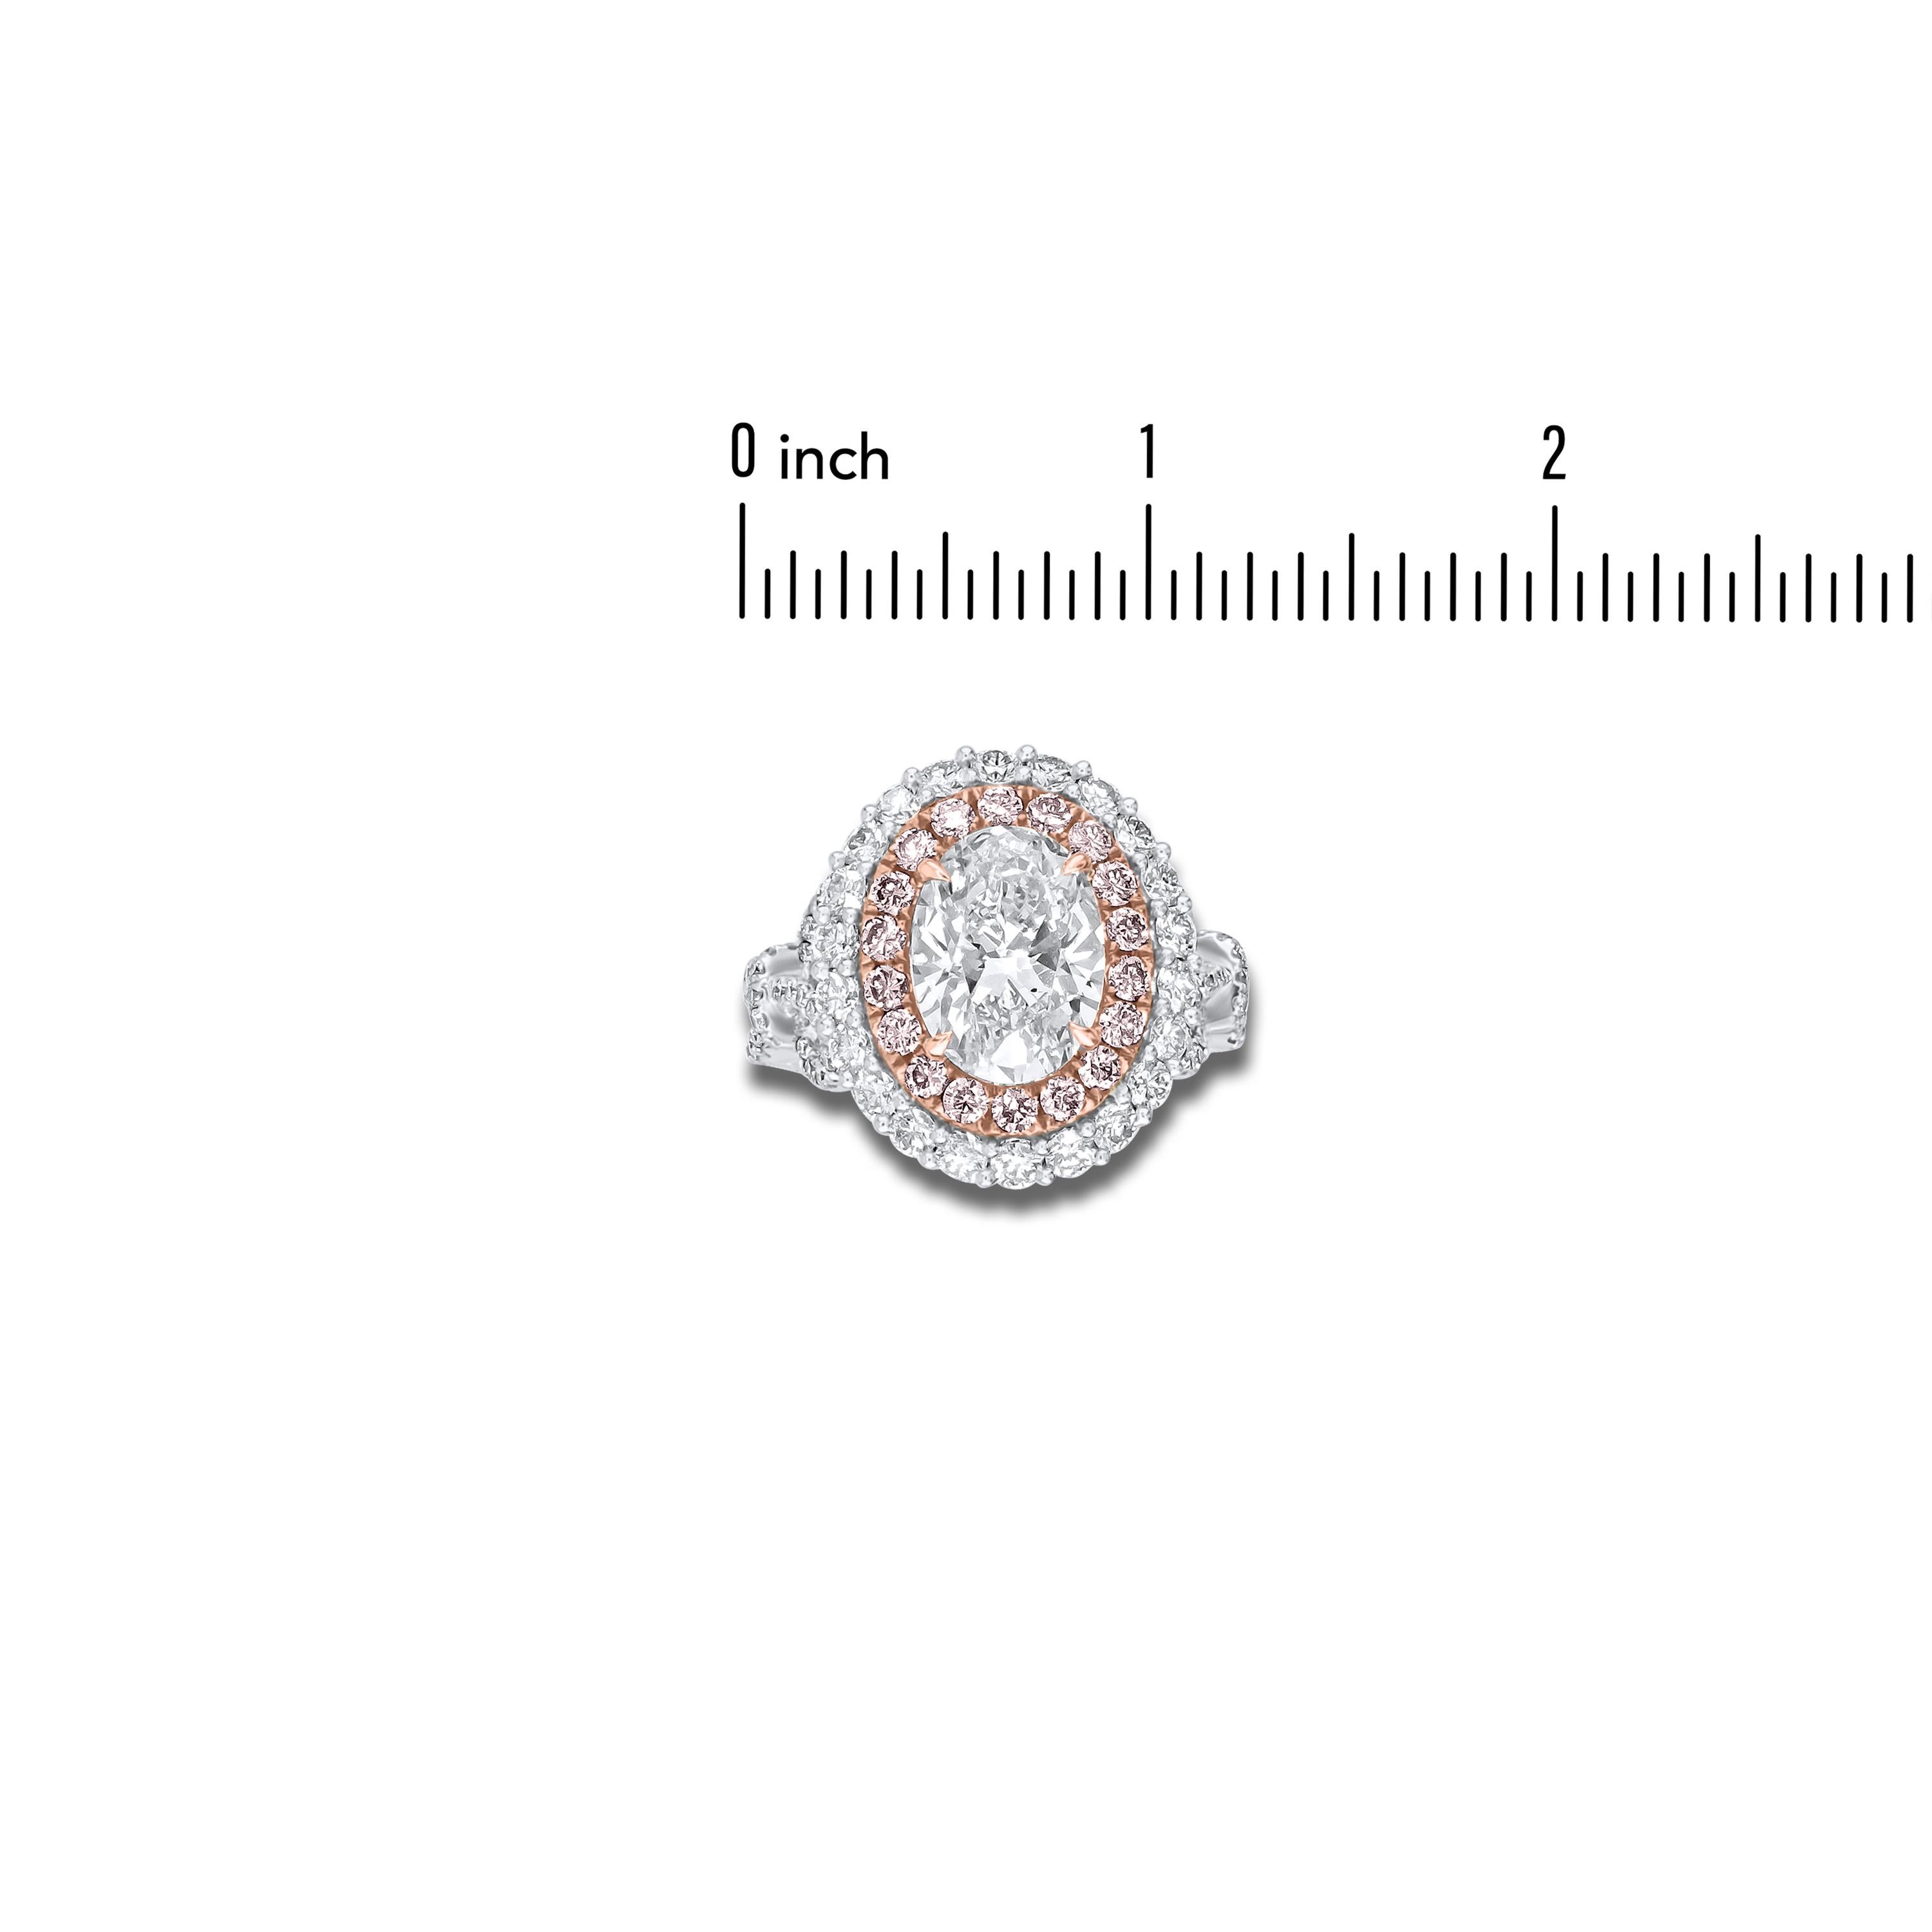 This stunning ring has a GIA-certified 3.02 carat oval diamond center, surrounded by a double halo of pink and white diamonds. Additional diamonds along the decorated shank bring the total carat weight to 5.18. The sides of the ring form a whimsical